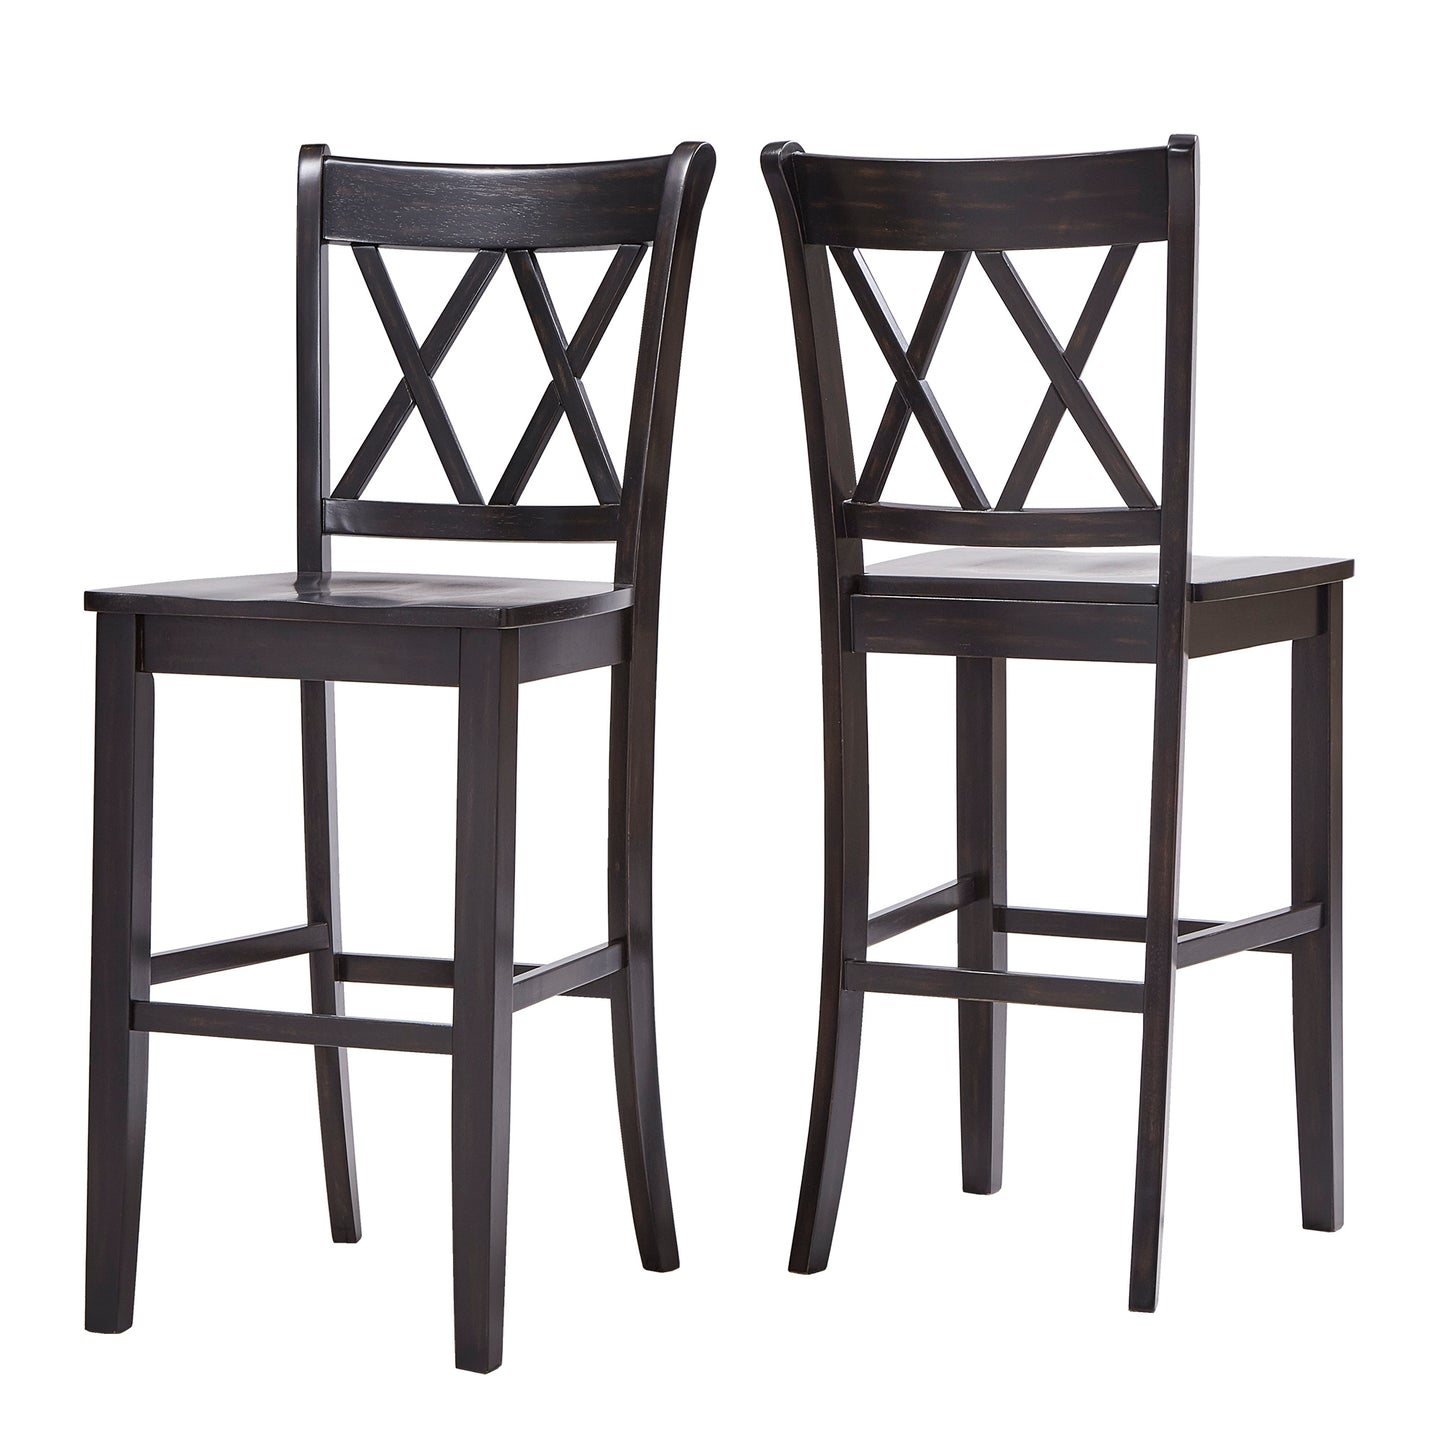 X-Back Bar Height Chairs (Set of 2) - Antique Black Finish